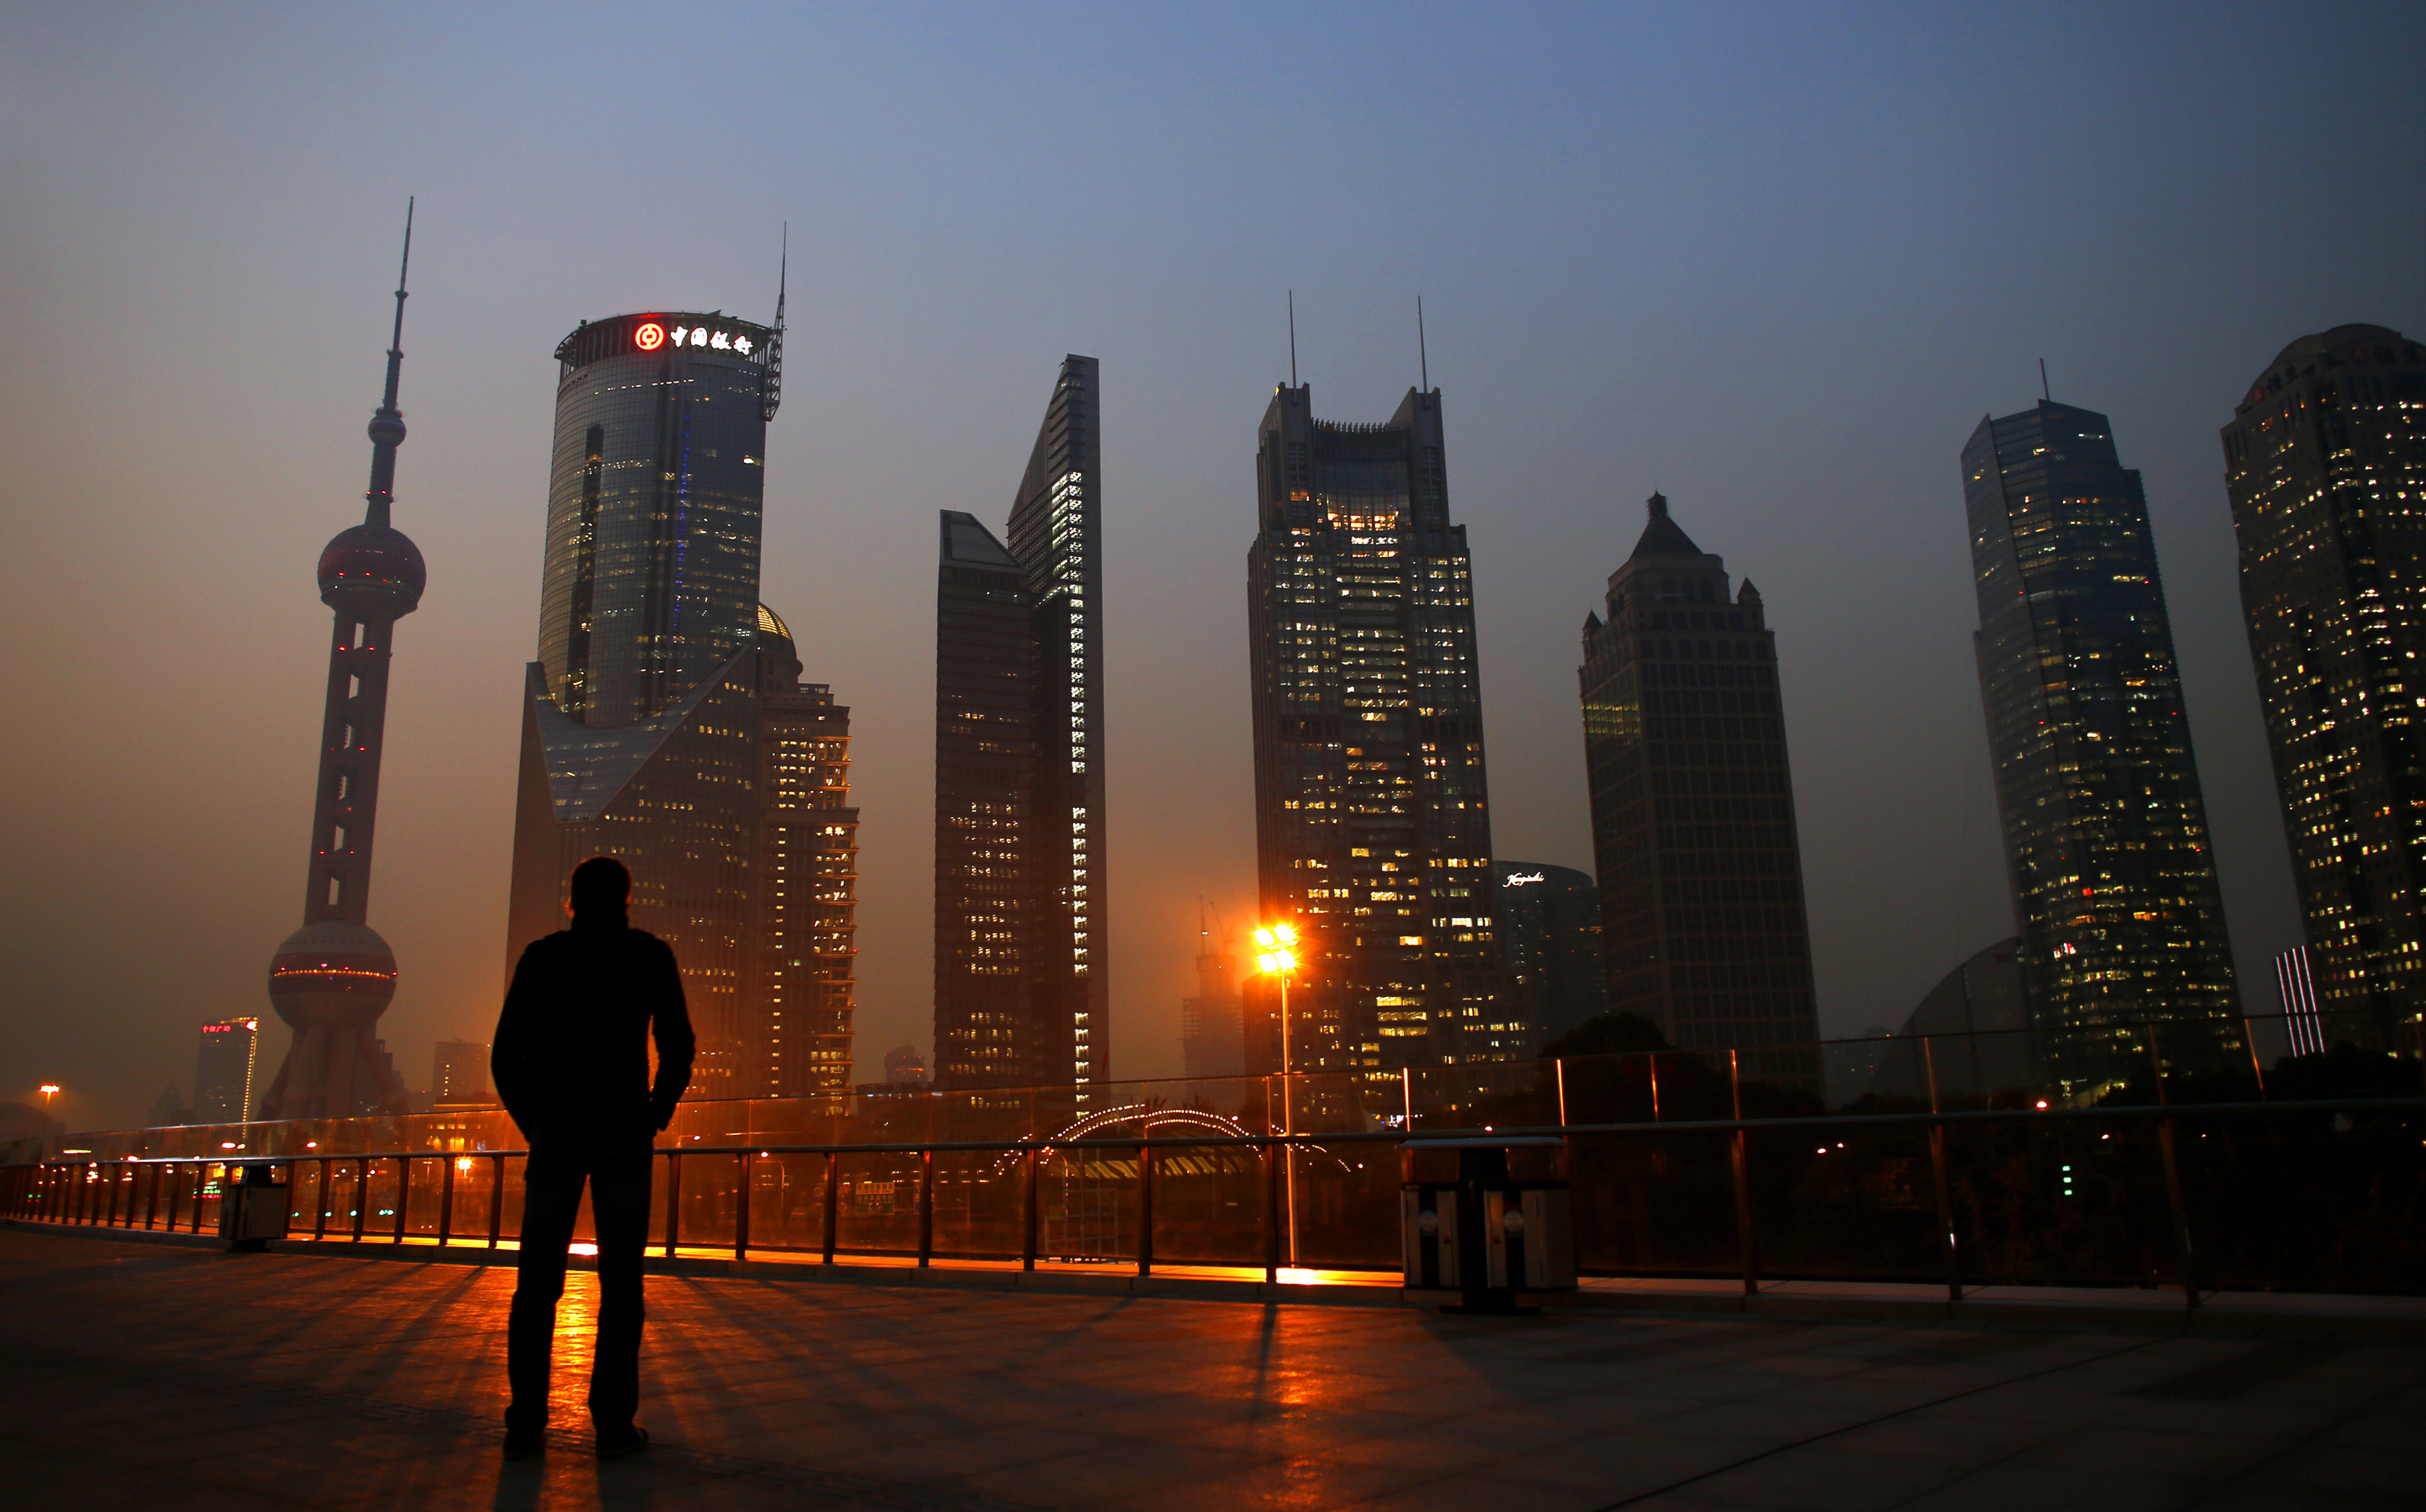 Man looks at the Pudong financial district of Shanghai